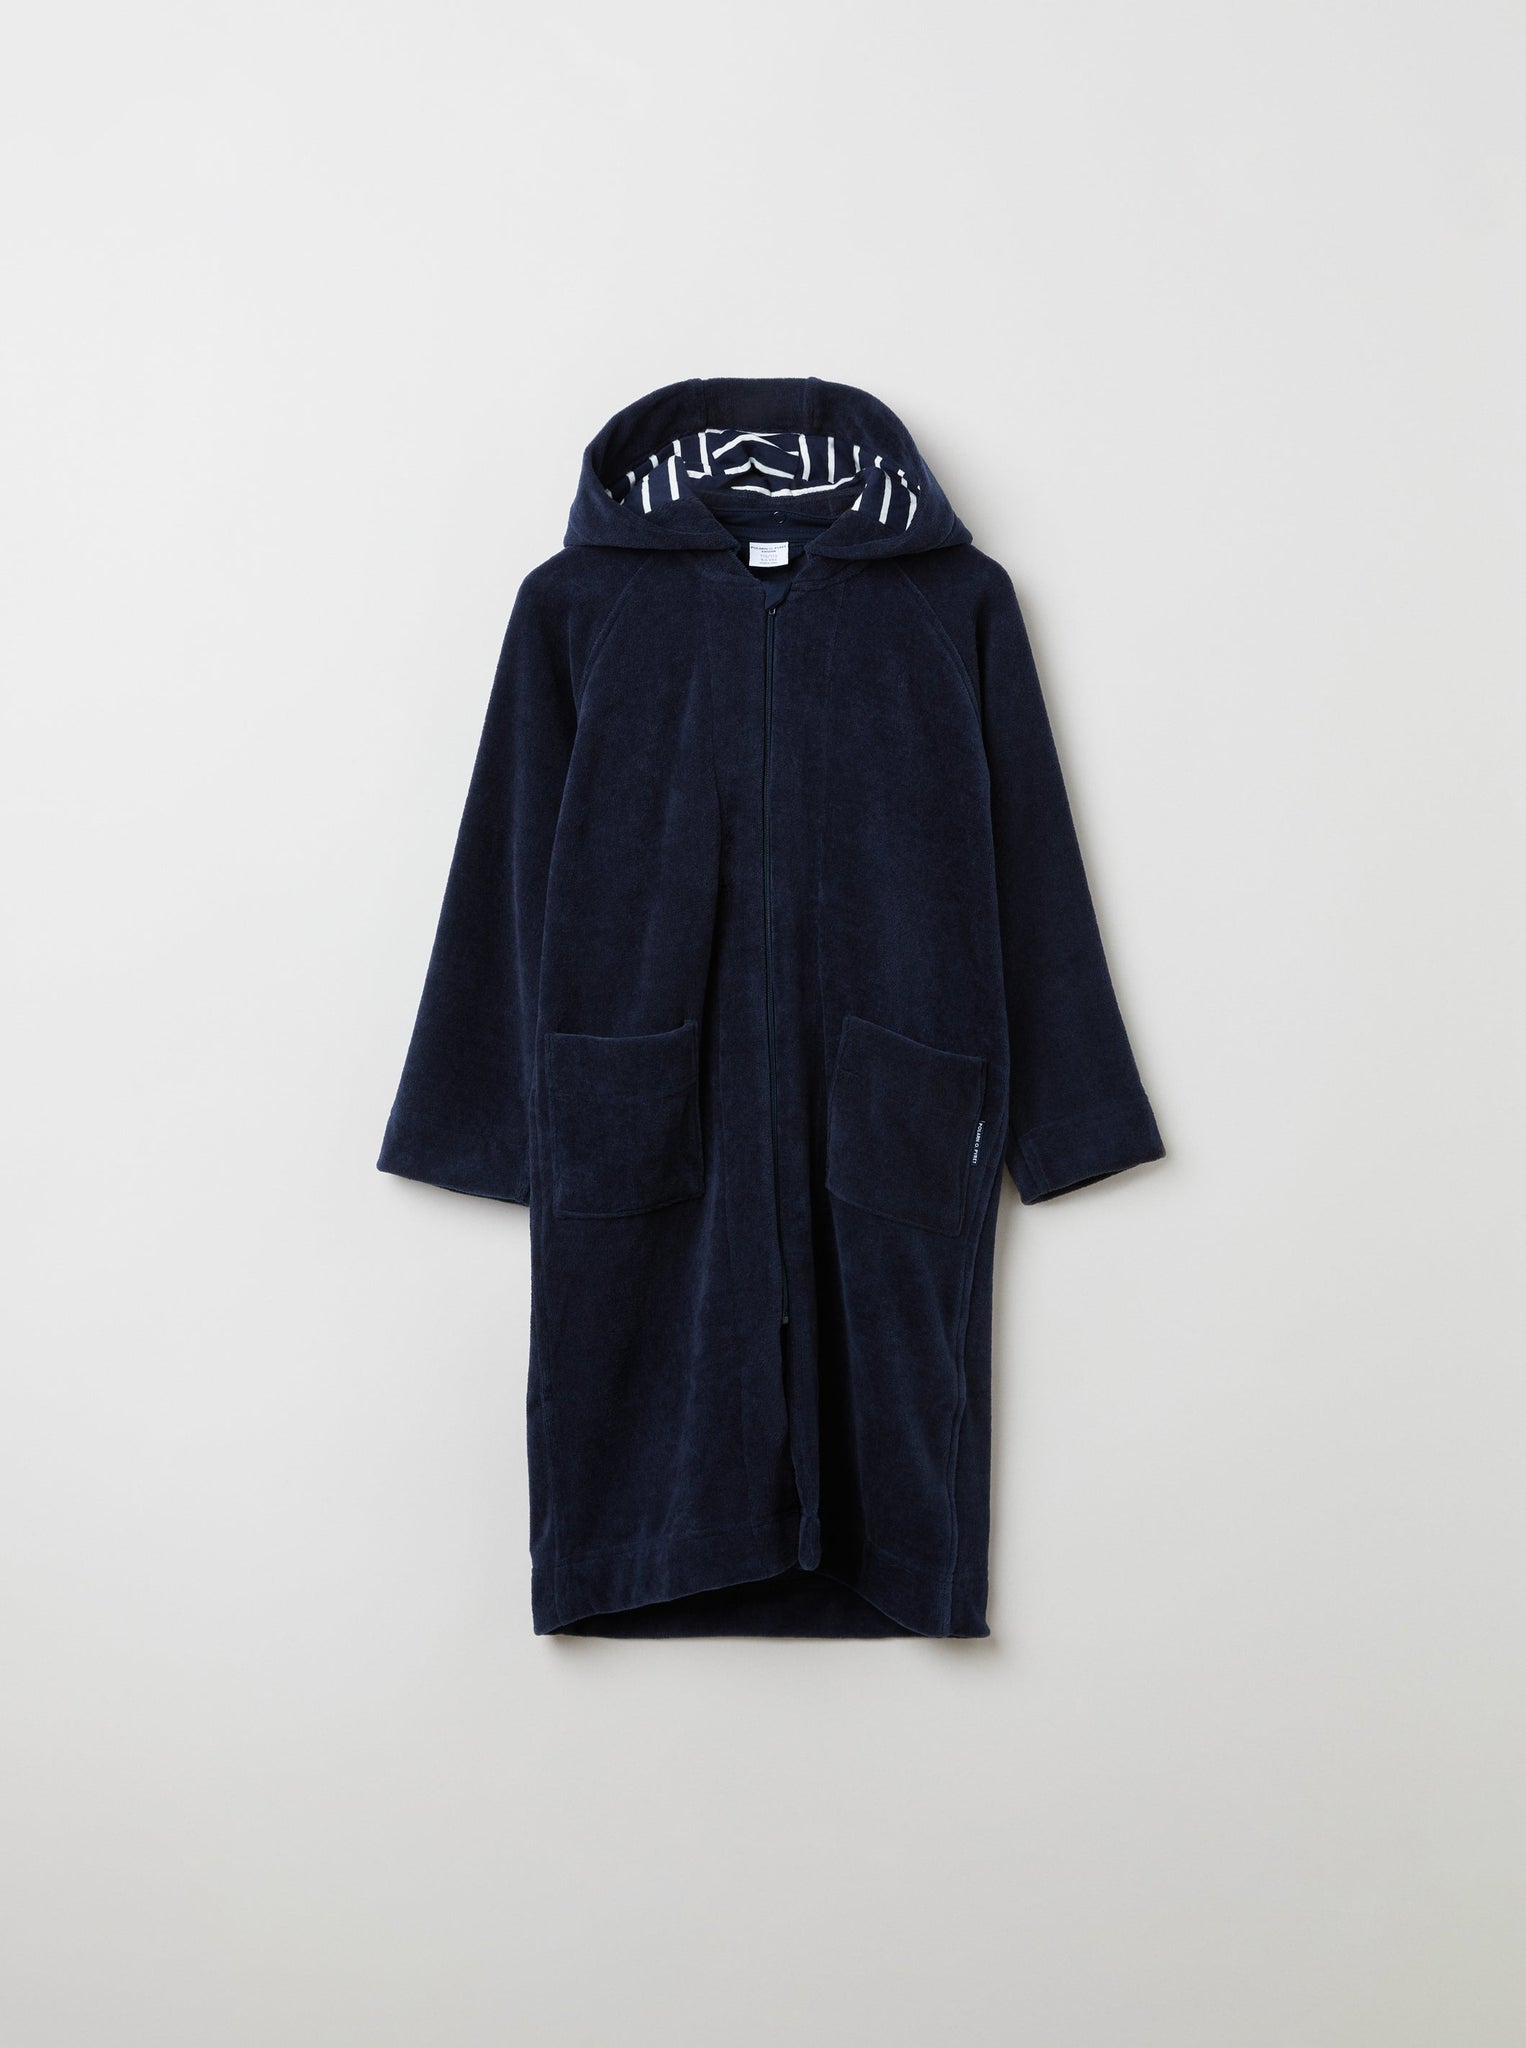 Cotton Navy Kids Dressing Gown from the Polarn O. Pyret kidswear collection. Clothes made using sustainably sourced materials.